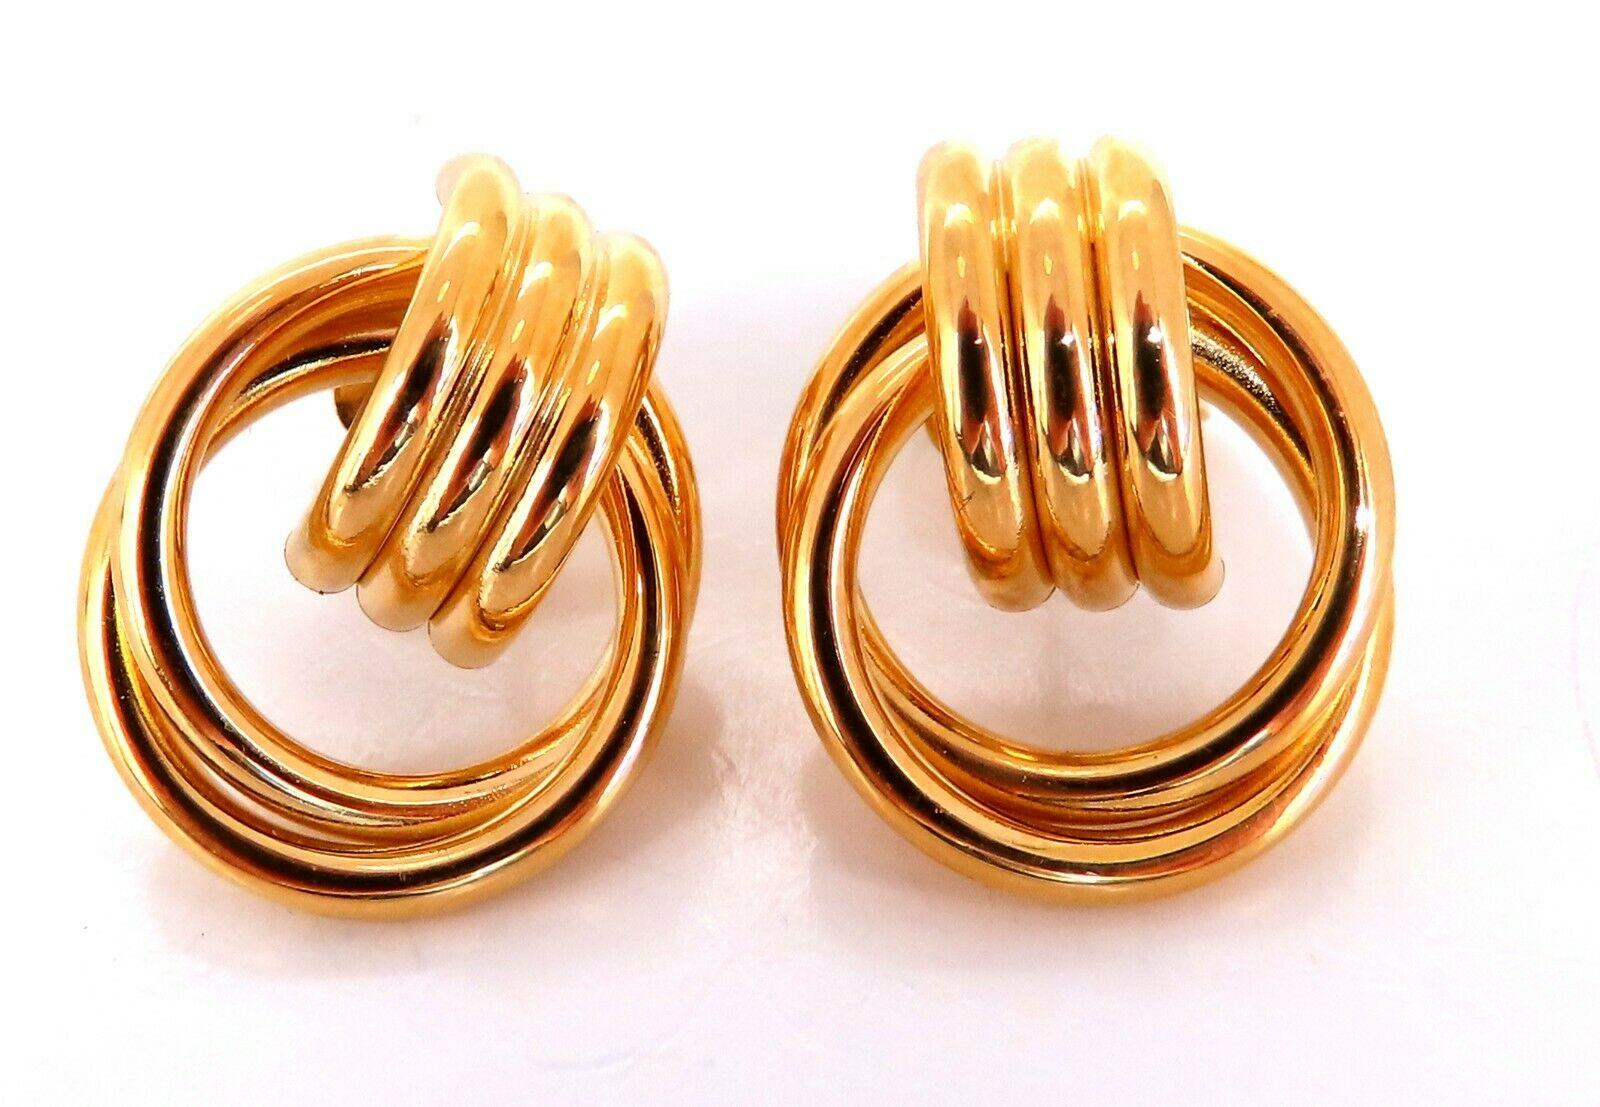 Double Loop Interlocking Tubular 

Knocker Textured Clip Earrings

Measurements: 

17 x 22mm

Depth: 7mm

Comfortable butterfly pierce

5.7 grams / 14kt. Yellow Gold

Earrings are gorgeous made